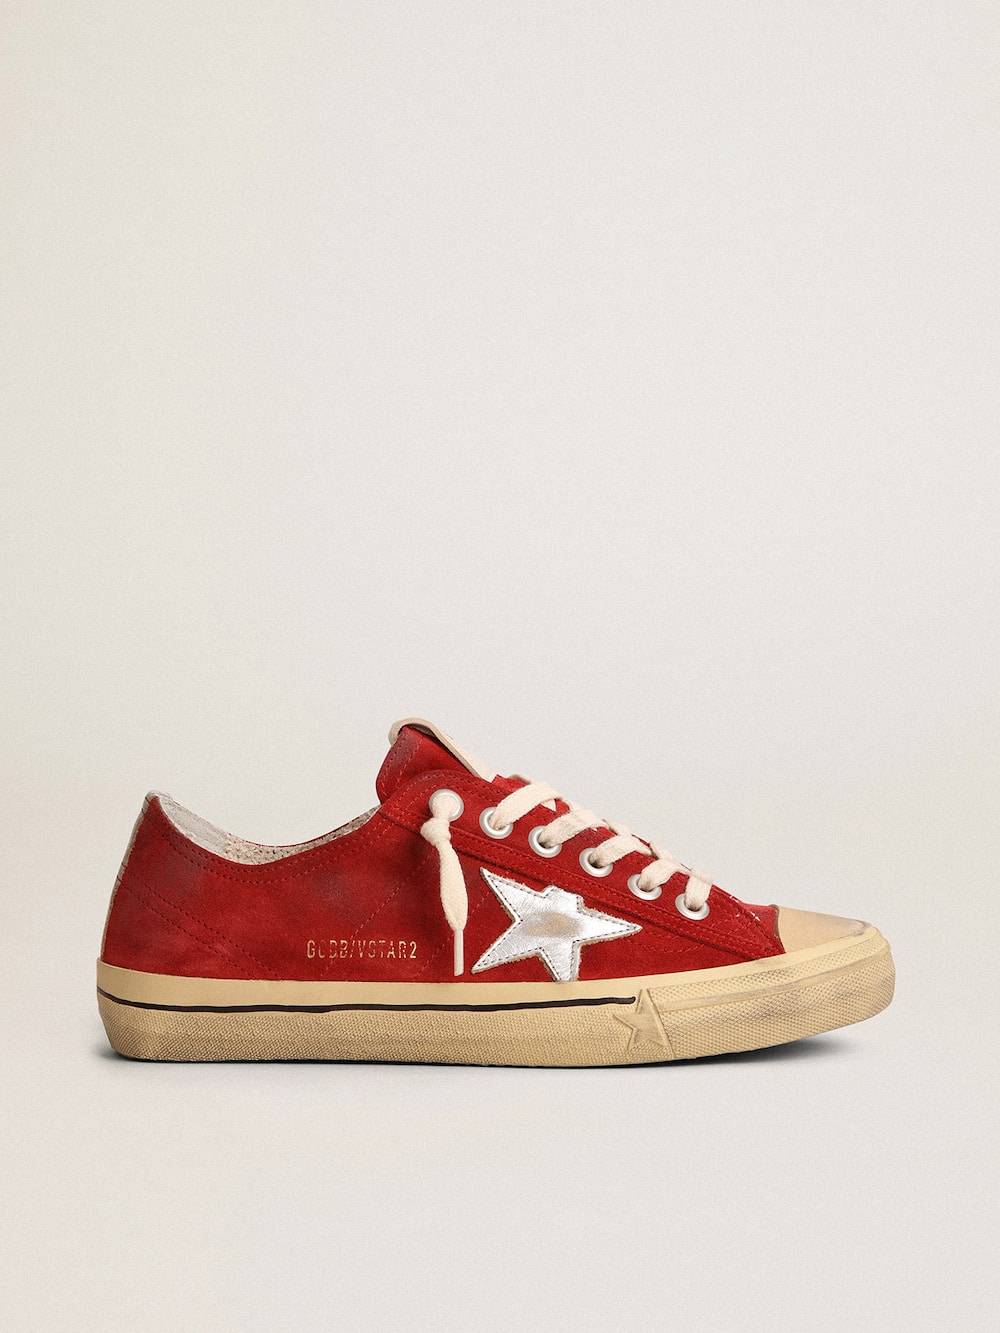 Golden Goose - Men's V-Star LTD in dark red suede with silver star and heel tab in 